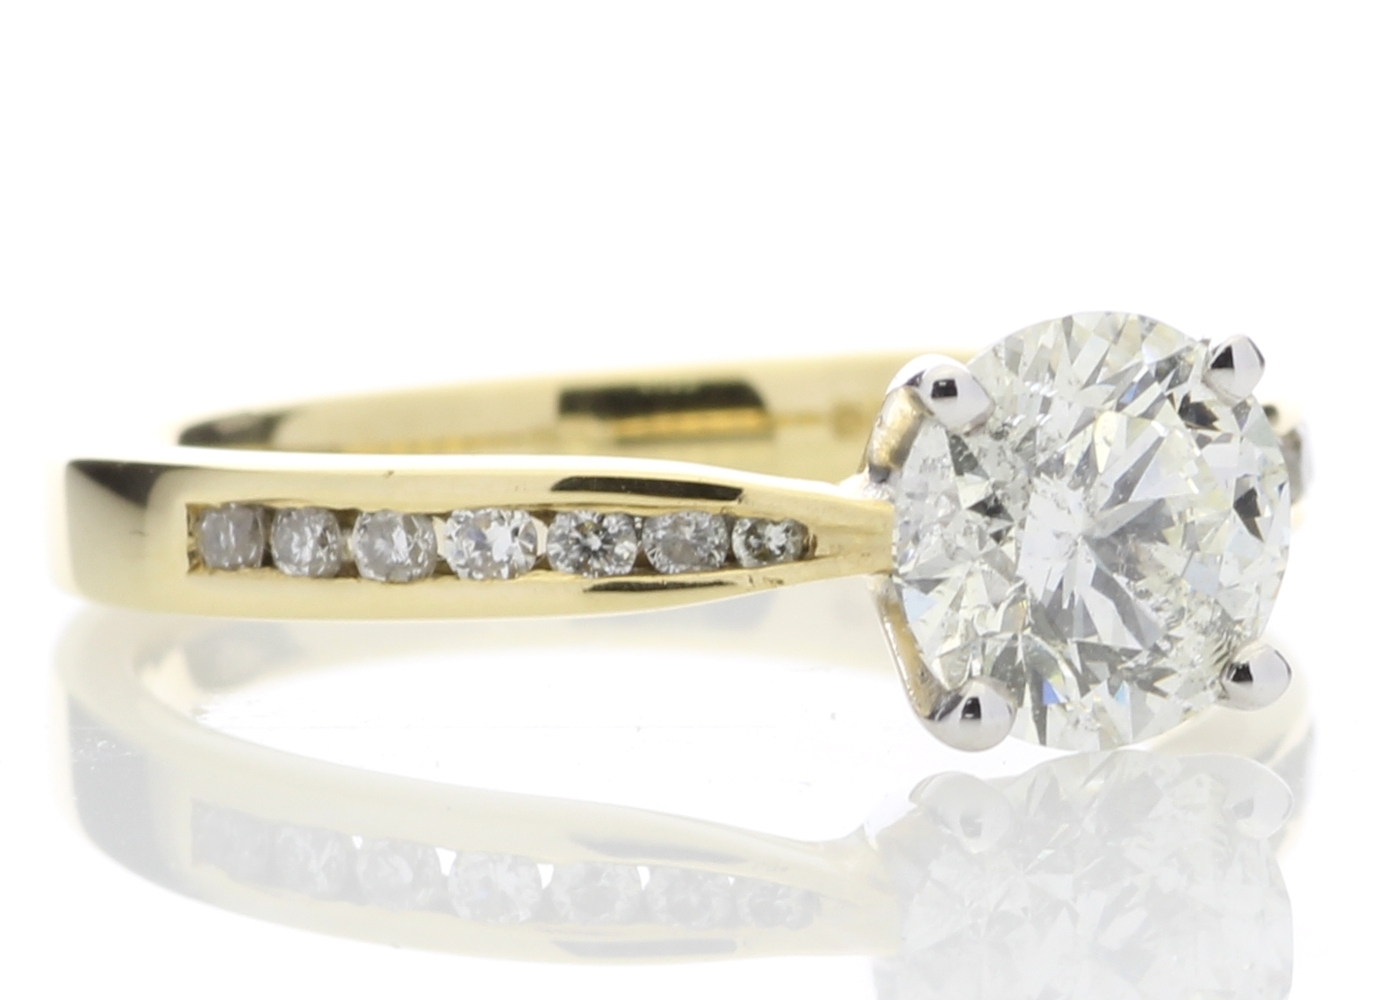 18ct Yellow Gold Single Stone Diamond Ring With Stone Set Shoulders (1.11) 1.28 - Image 4 of 5